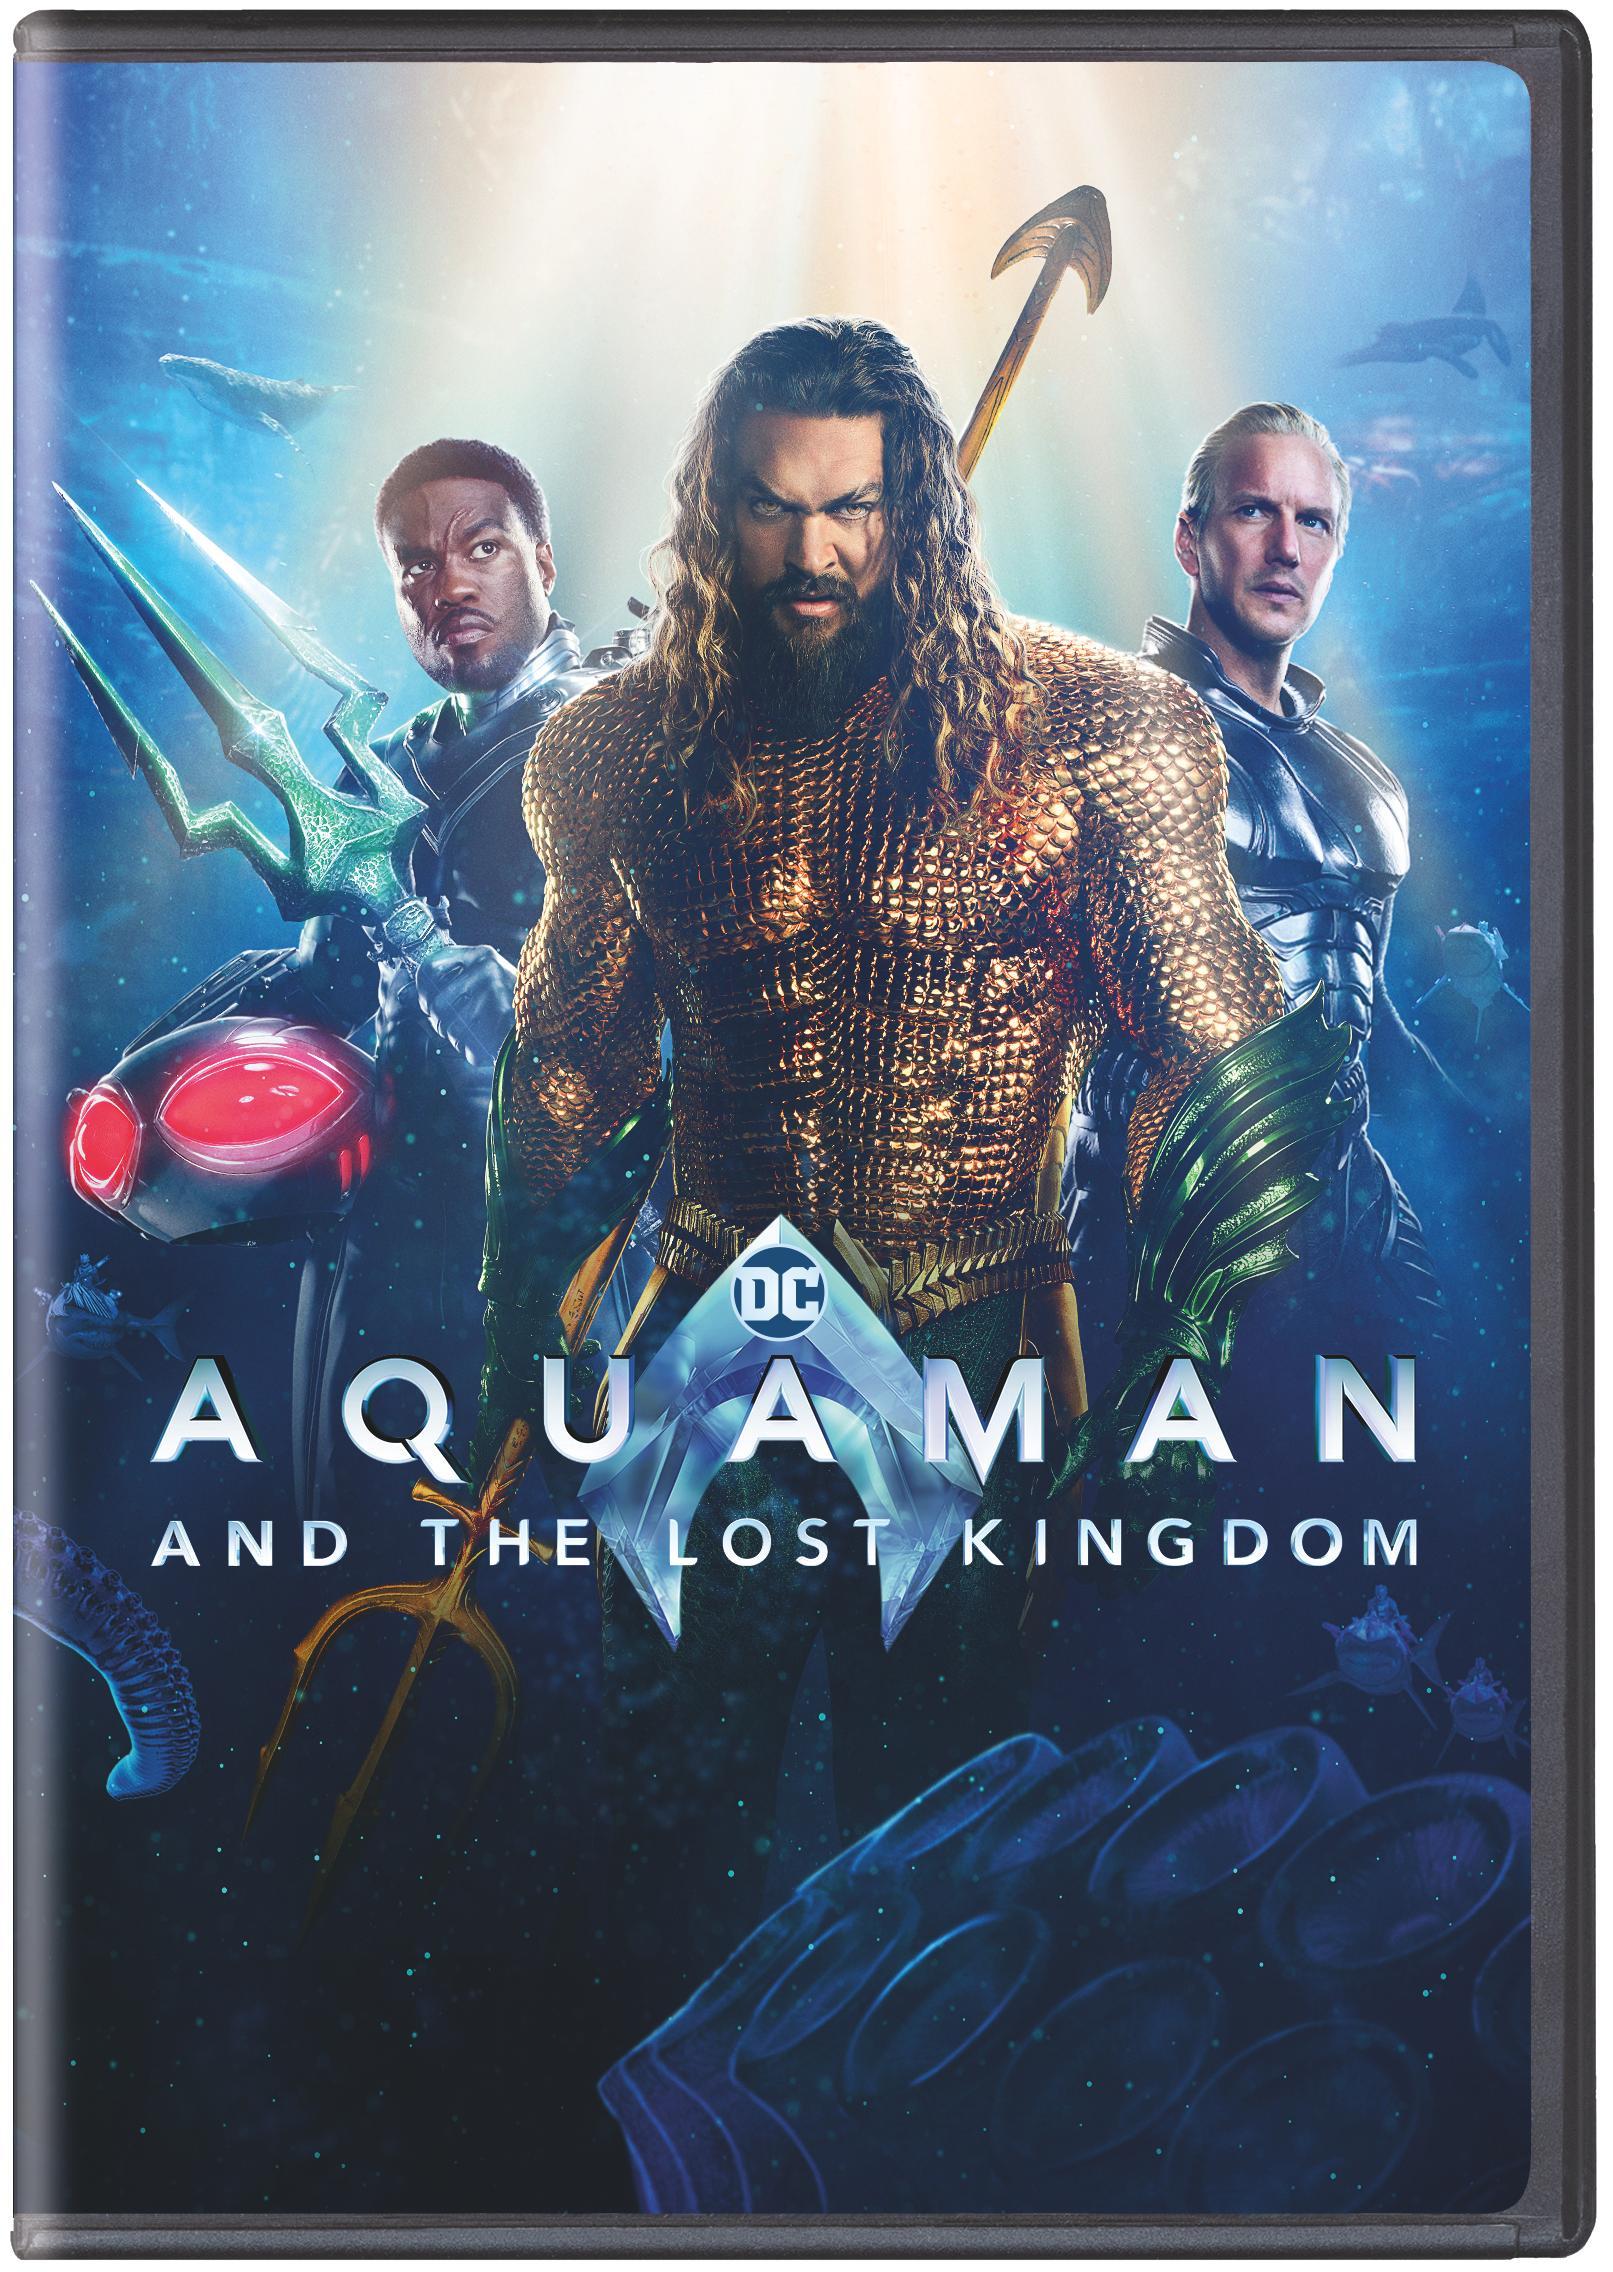 Aquaman and the Lost Kingdom (DVD) - image 1 of 7